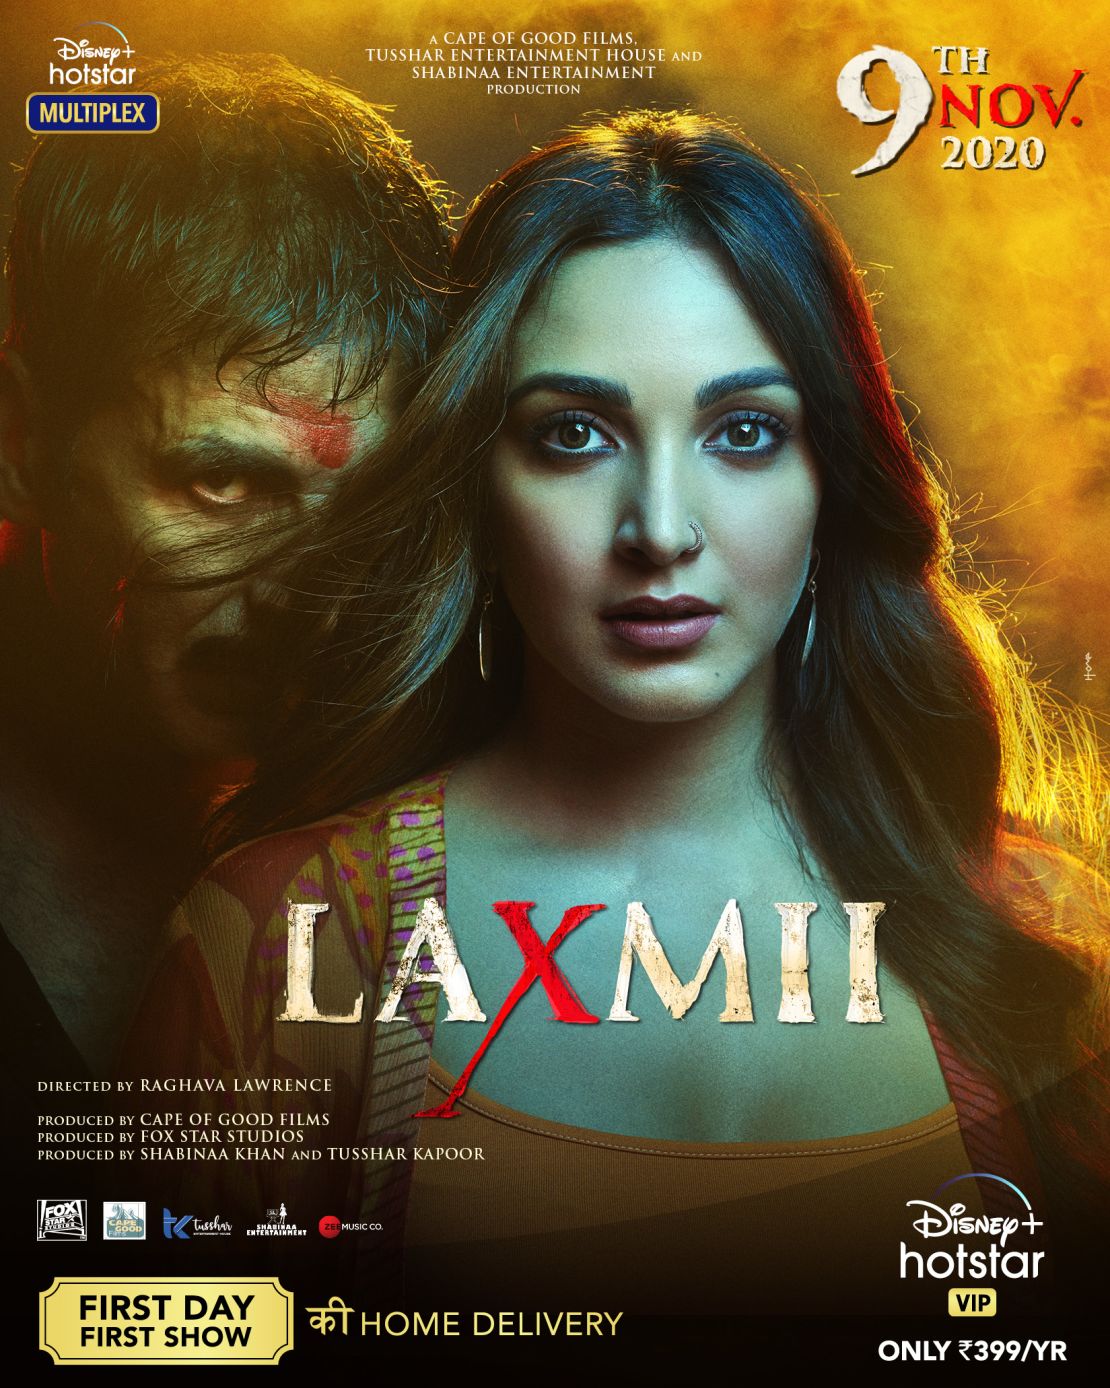 A promotional poster for the Bollywood movie "Laxmii."